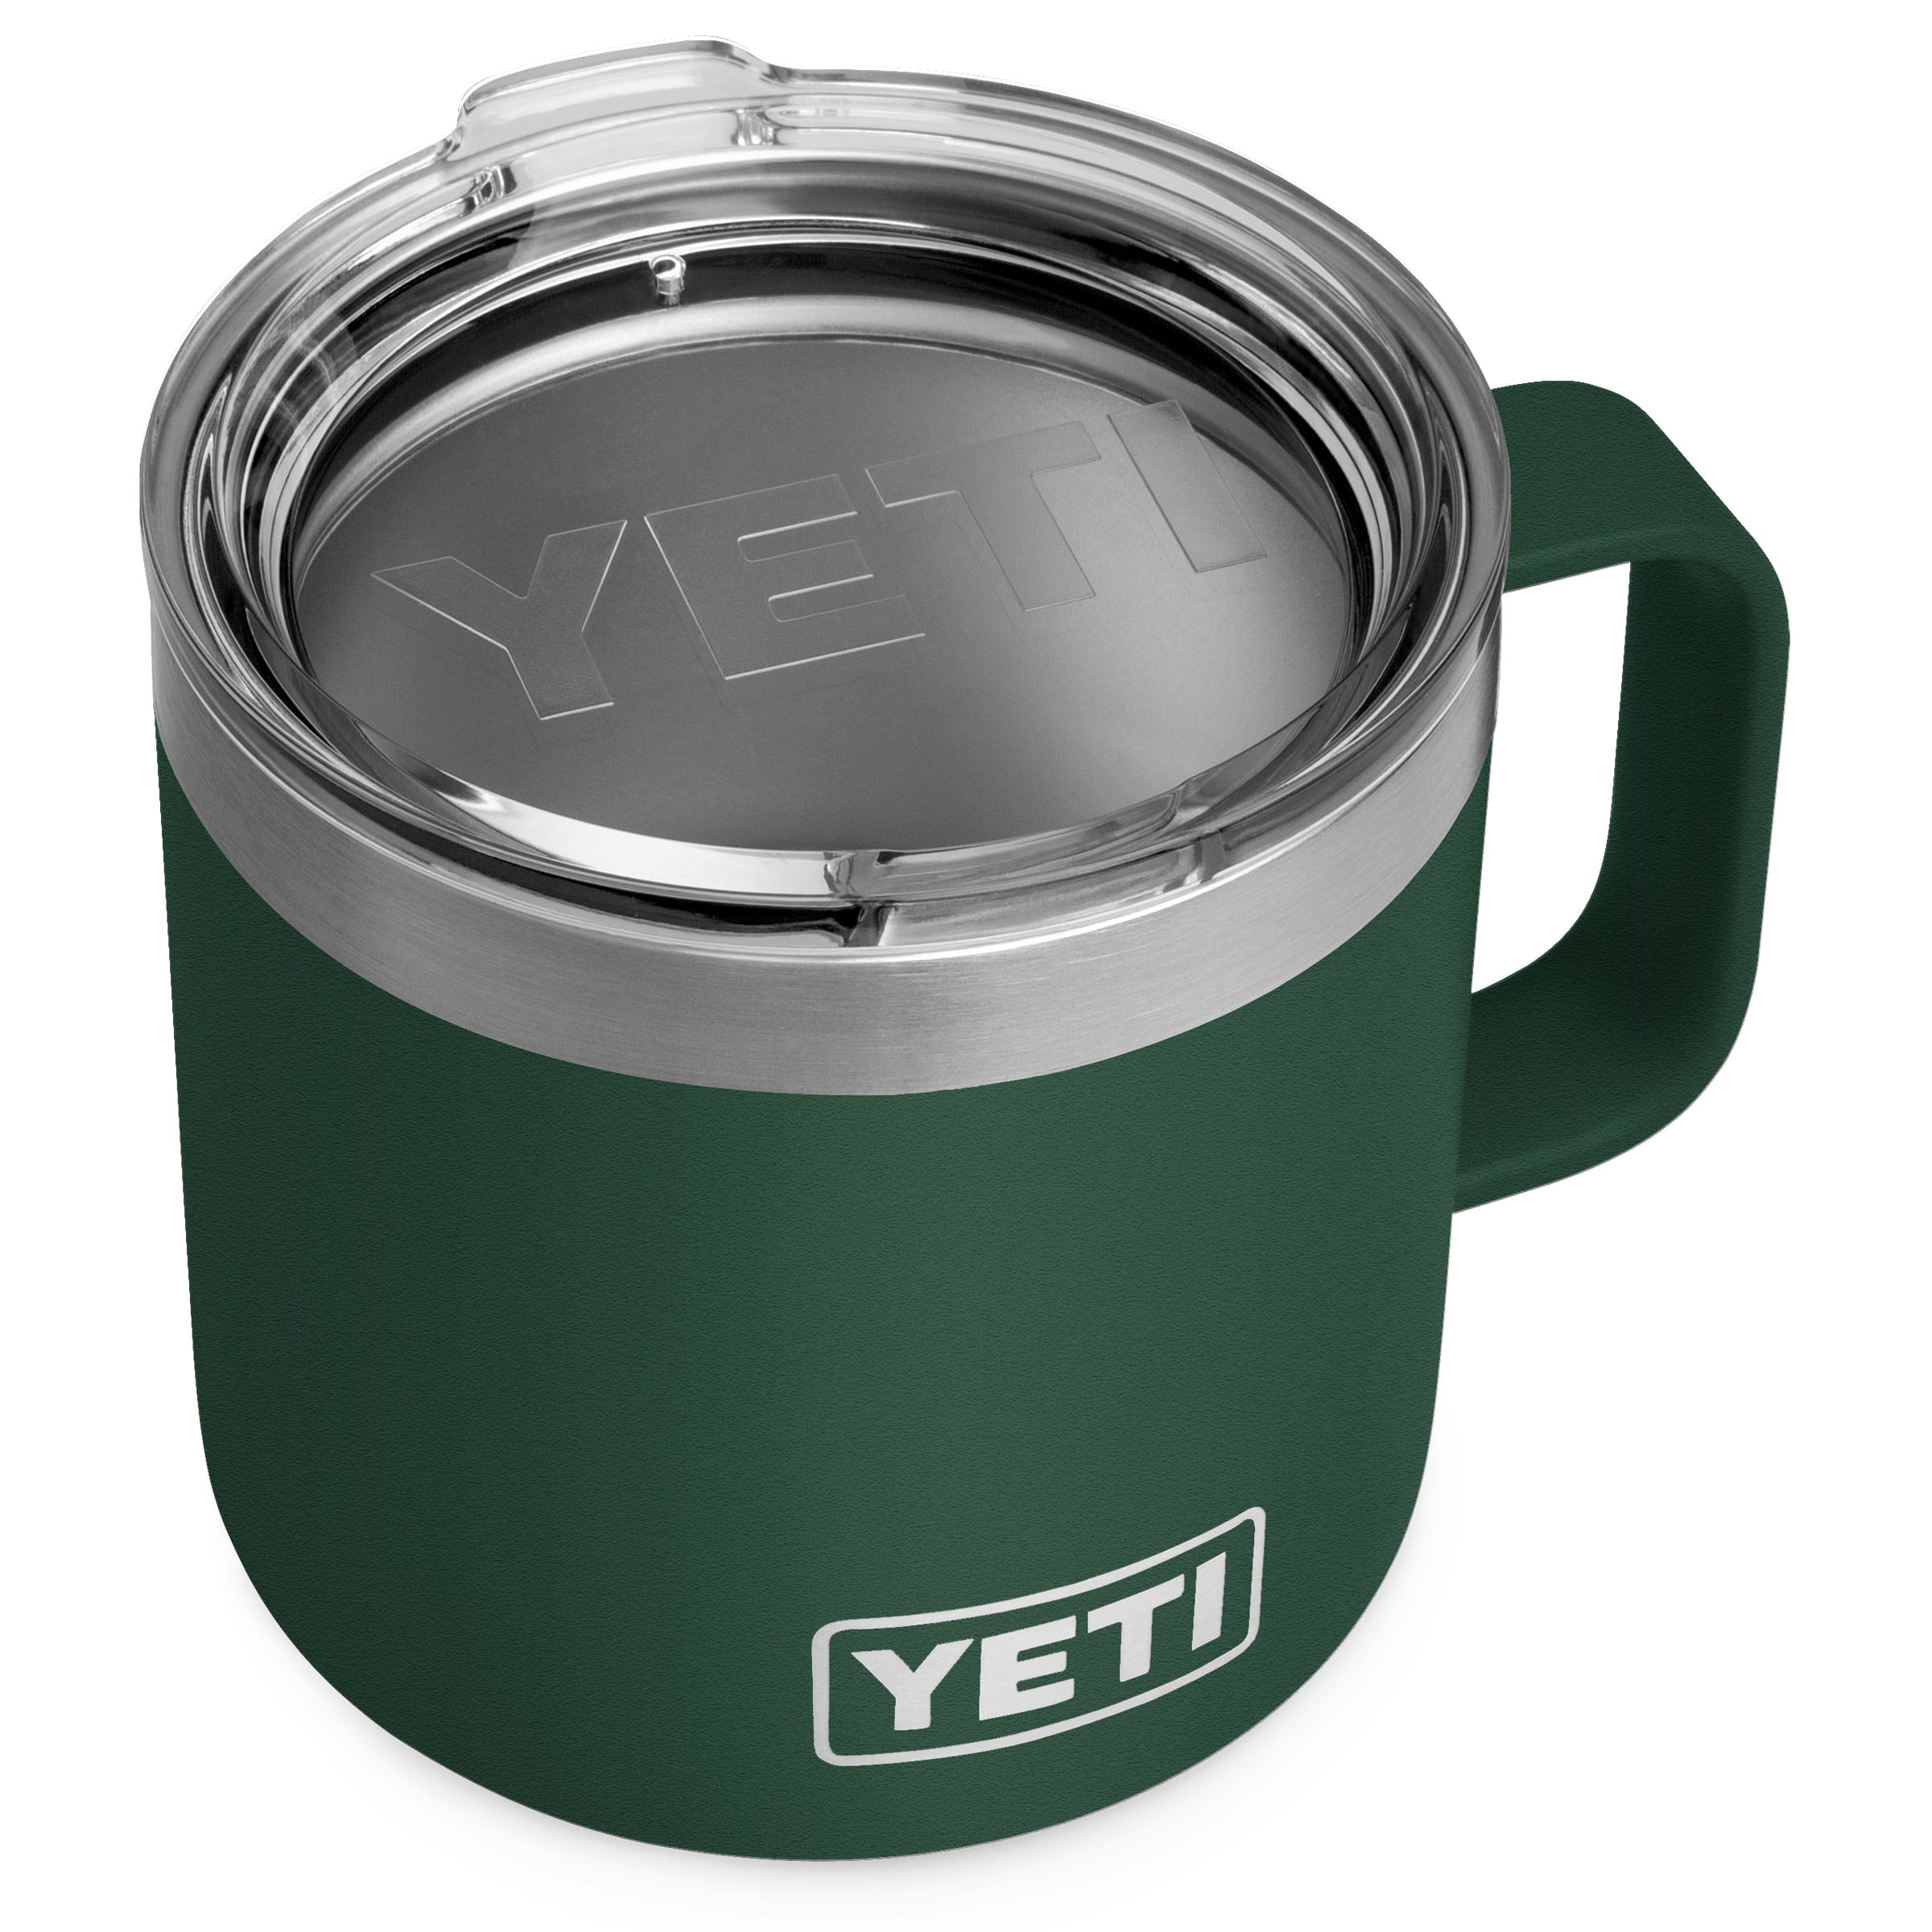 YETI Rambler 24 oz Mug for Sale in Dundee Township, IL - OfferUp